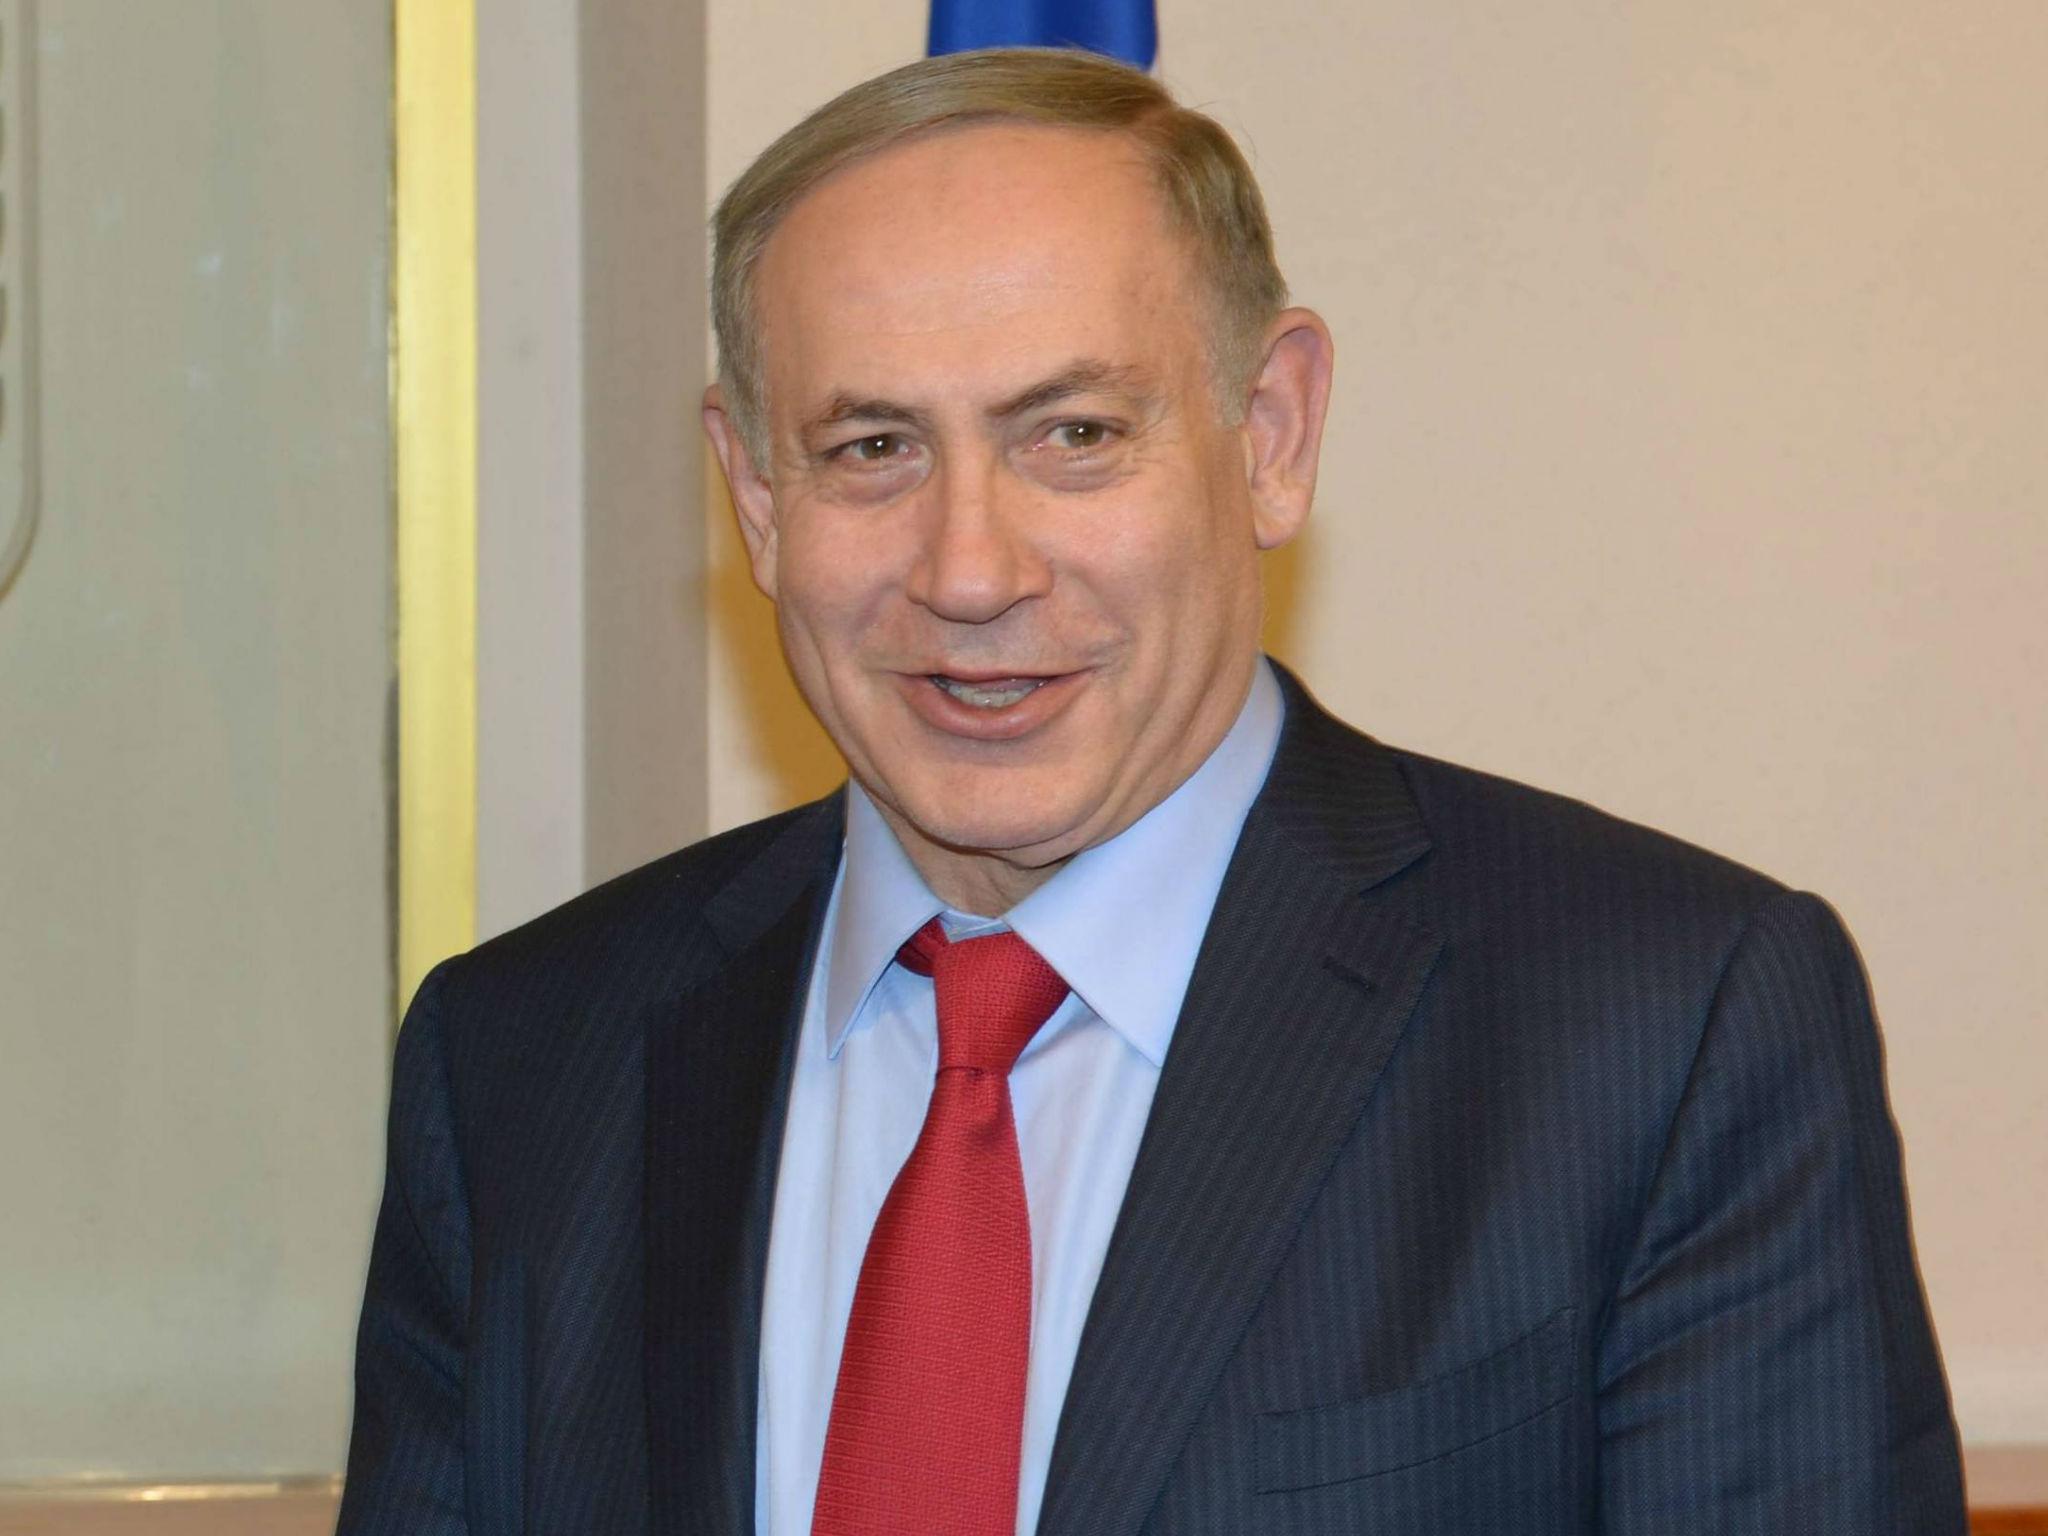 Benjamin Netanyahu warned Iran that Israel will stand up to their threats and aggression